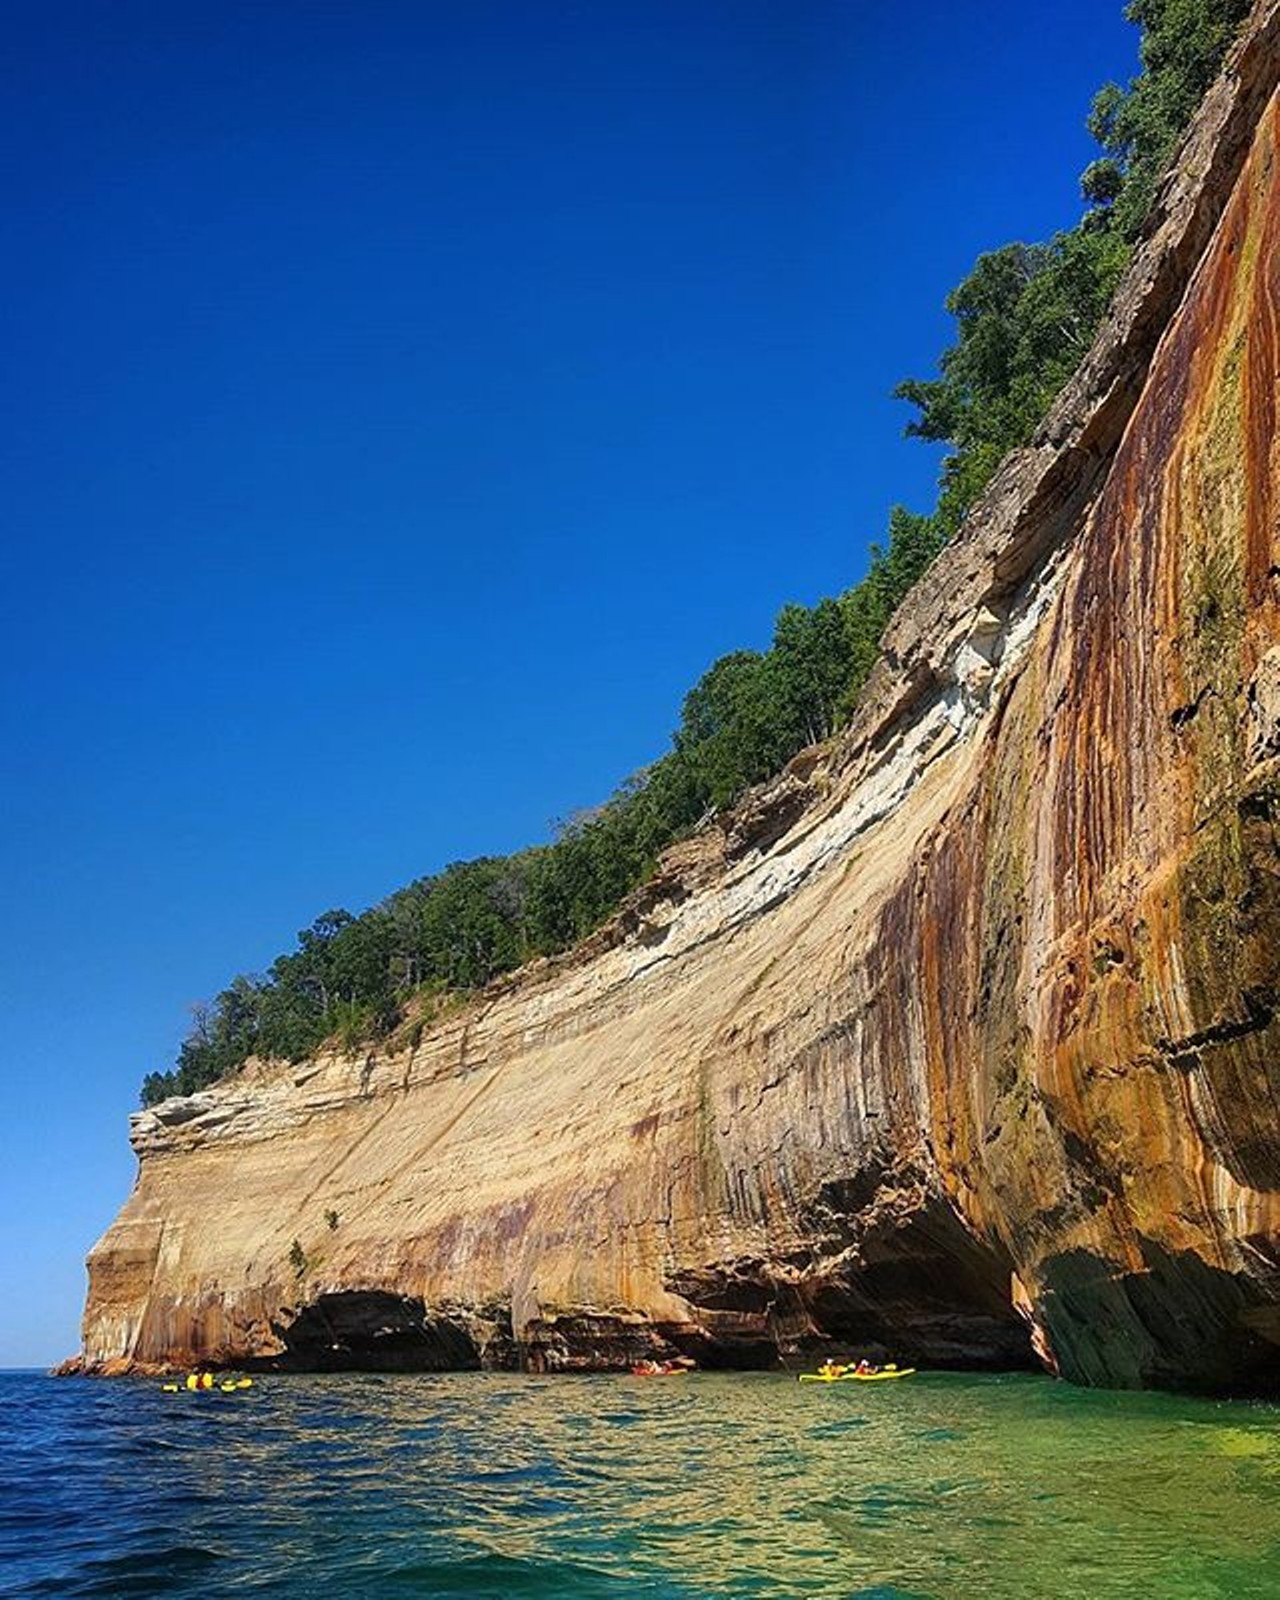 Pictured Rocks, Munising
Sitting on the majestic shore of Lake Superior, Pictured Rocks stretches 42 miles long and appears to reach the sky. It&#146;s the perfect reminder that the world is bigger and more beautiful than we&#146;ll ever understand.(Photo via Instagram, @svorpag)